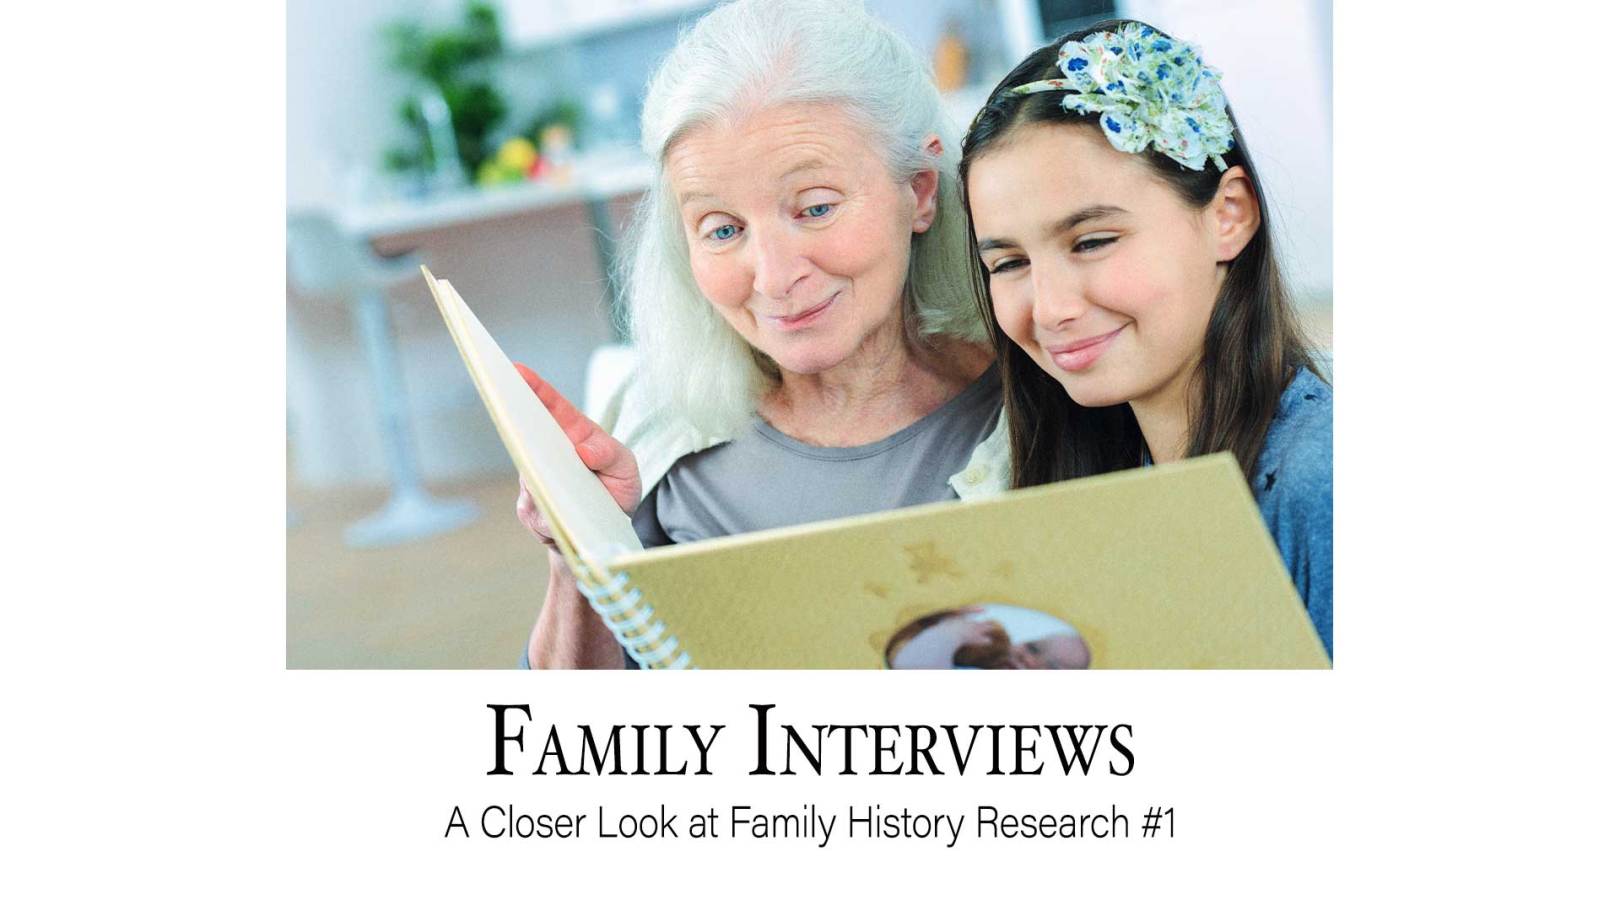 Family Interviews: A Closer Look at Family History Research #1